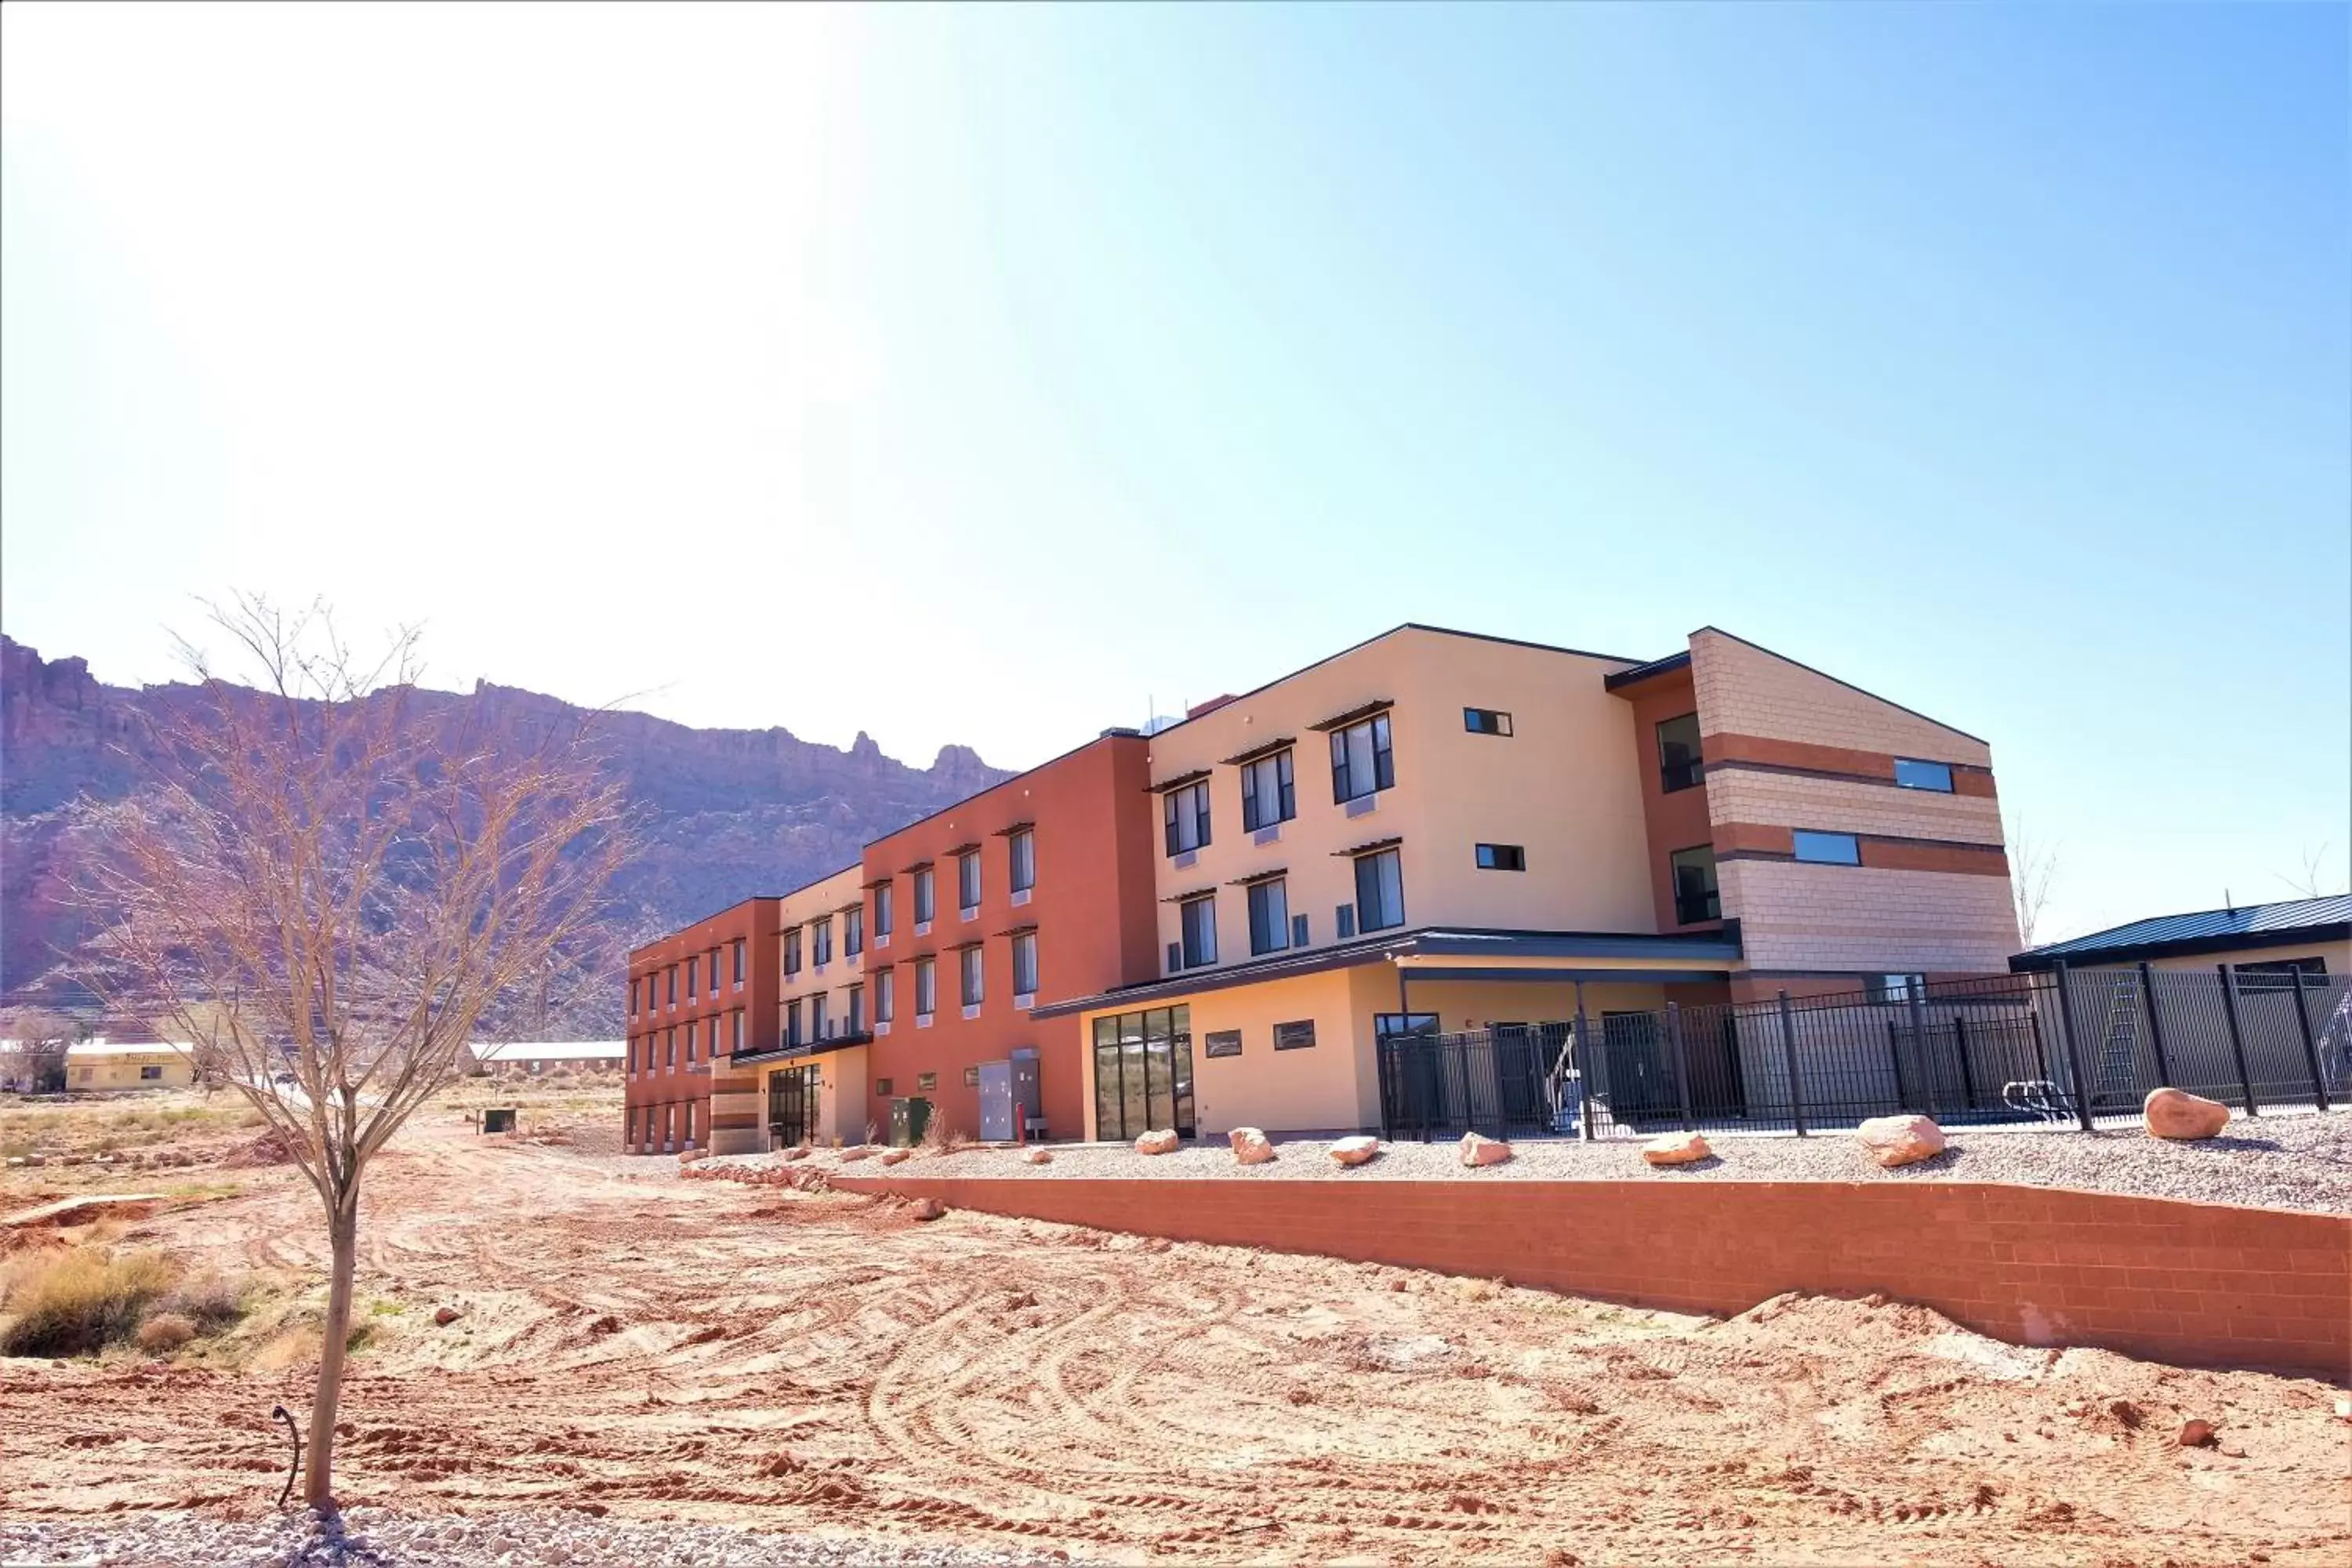 Property building in Scenic View Inn & Suites Moab